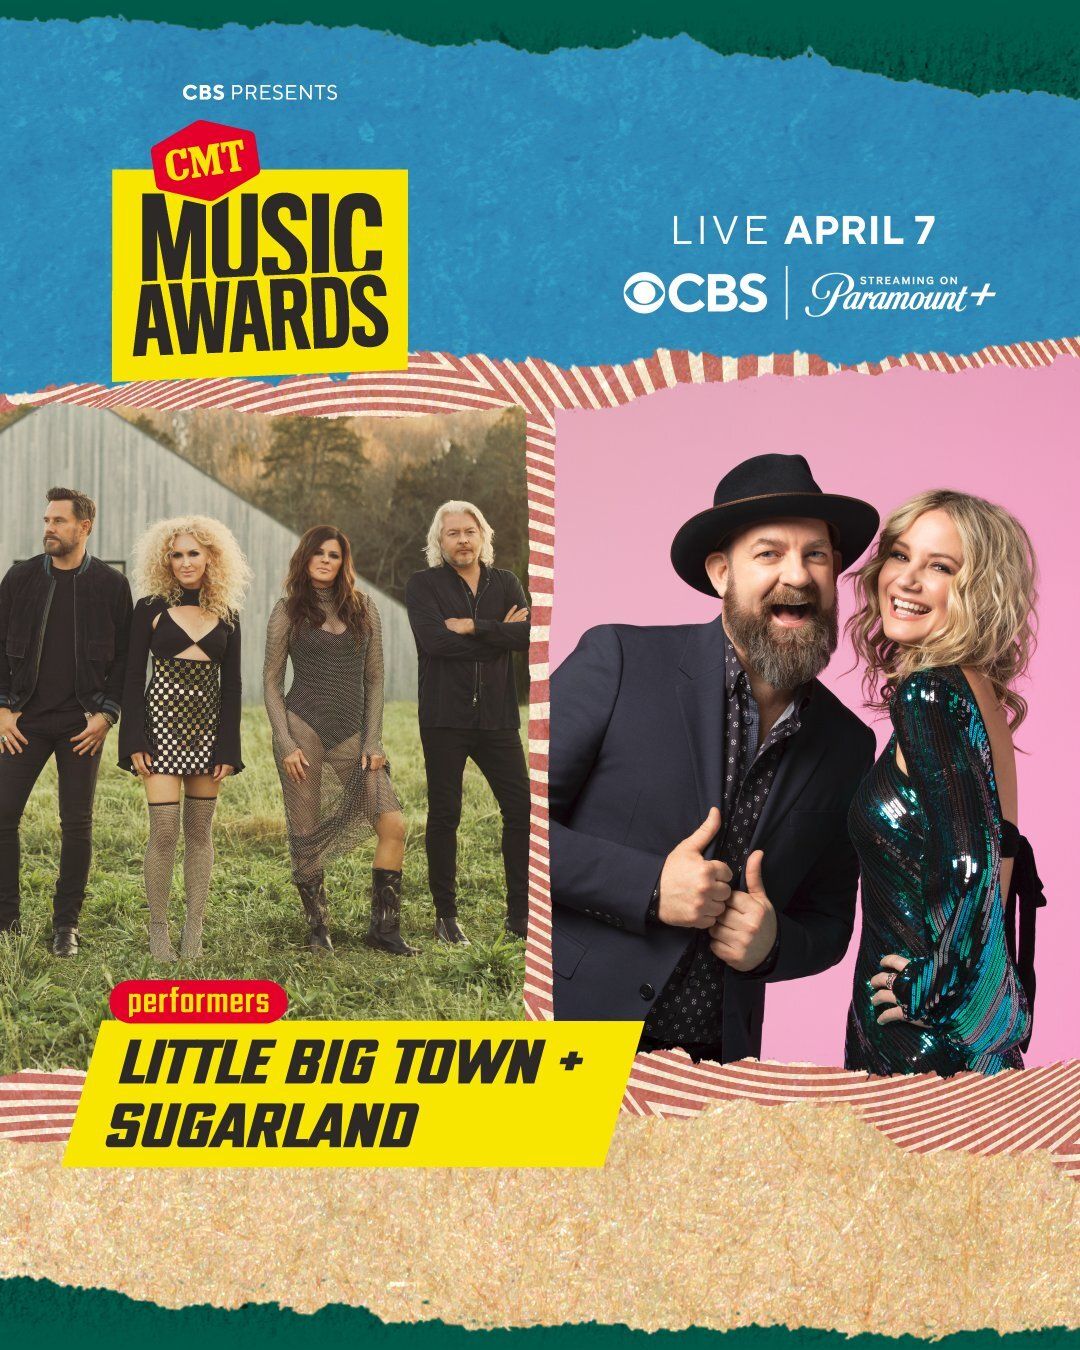 Little Big Town + Sugarland set for world premiere collaboration LIVE on the 2024 CMT MUSIC AWARDS April 7th on CBS